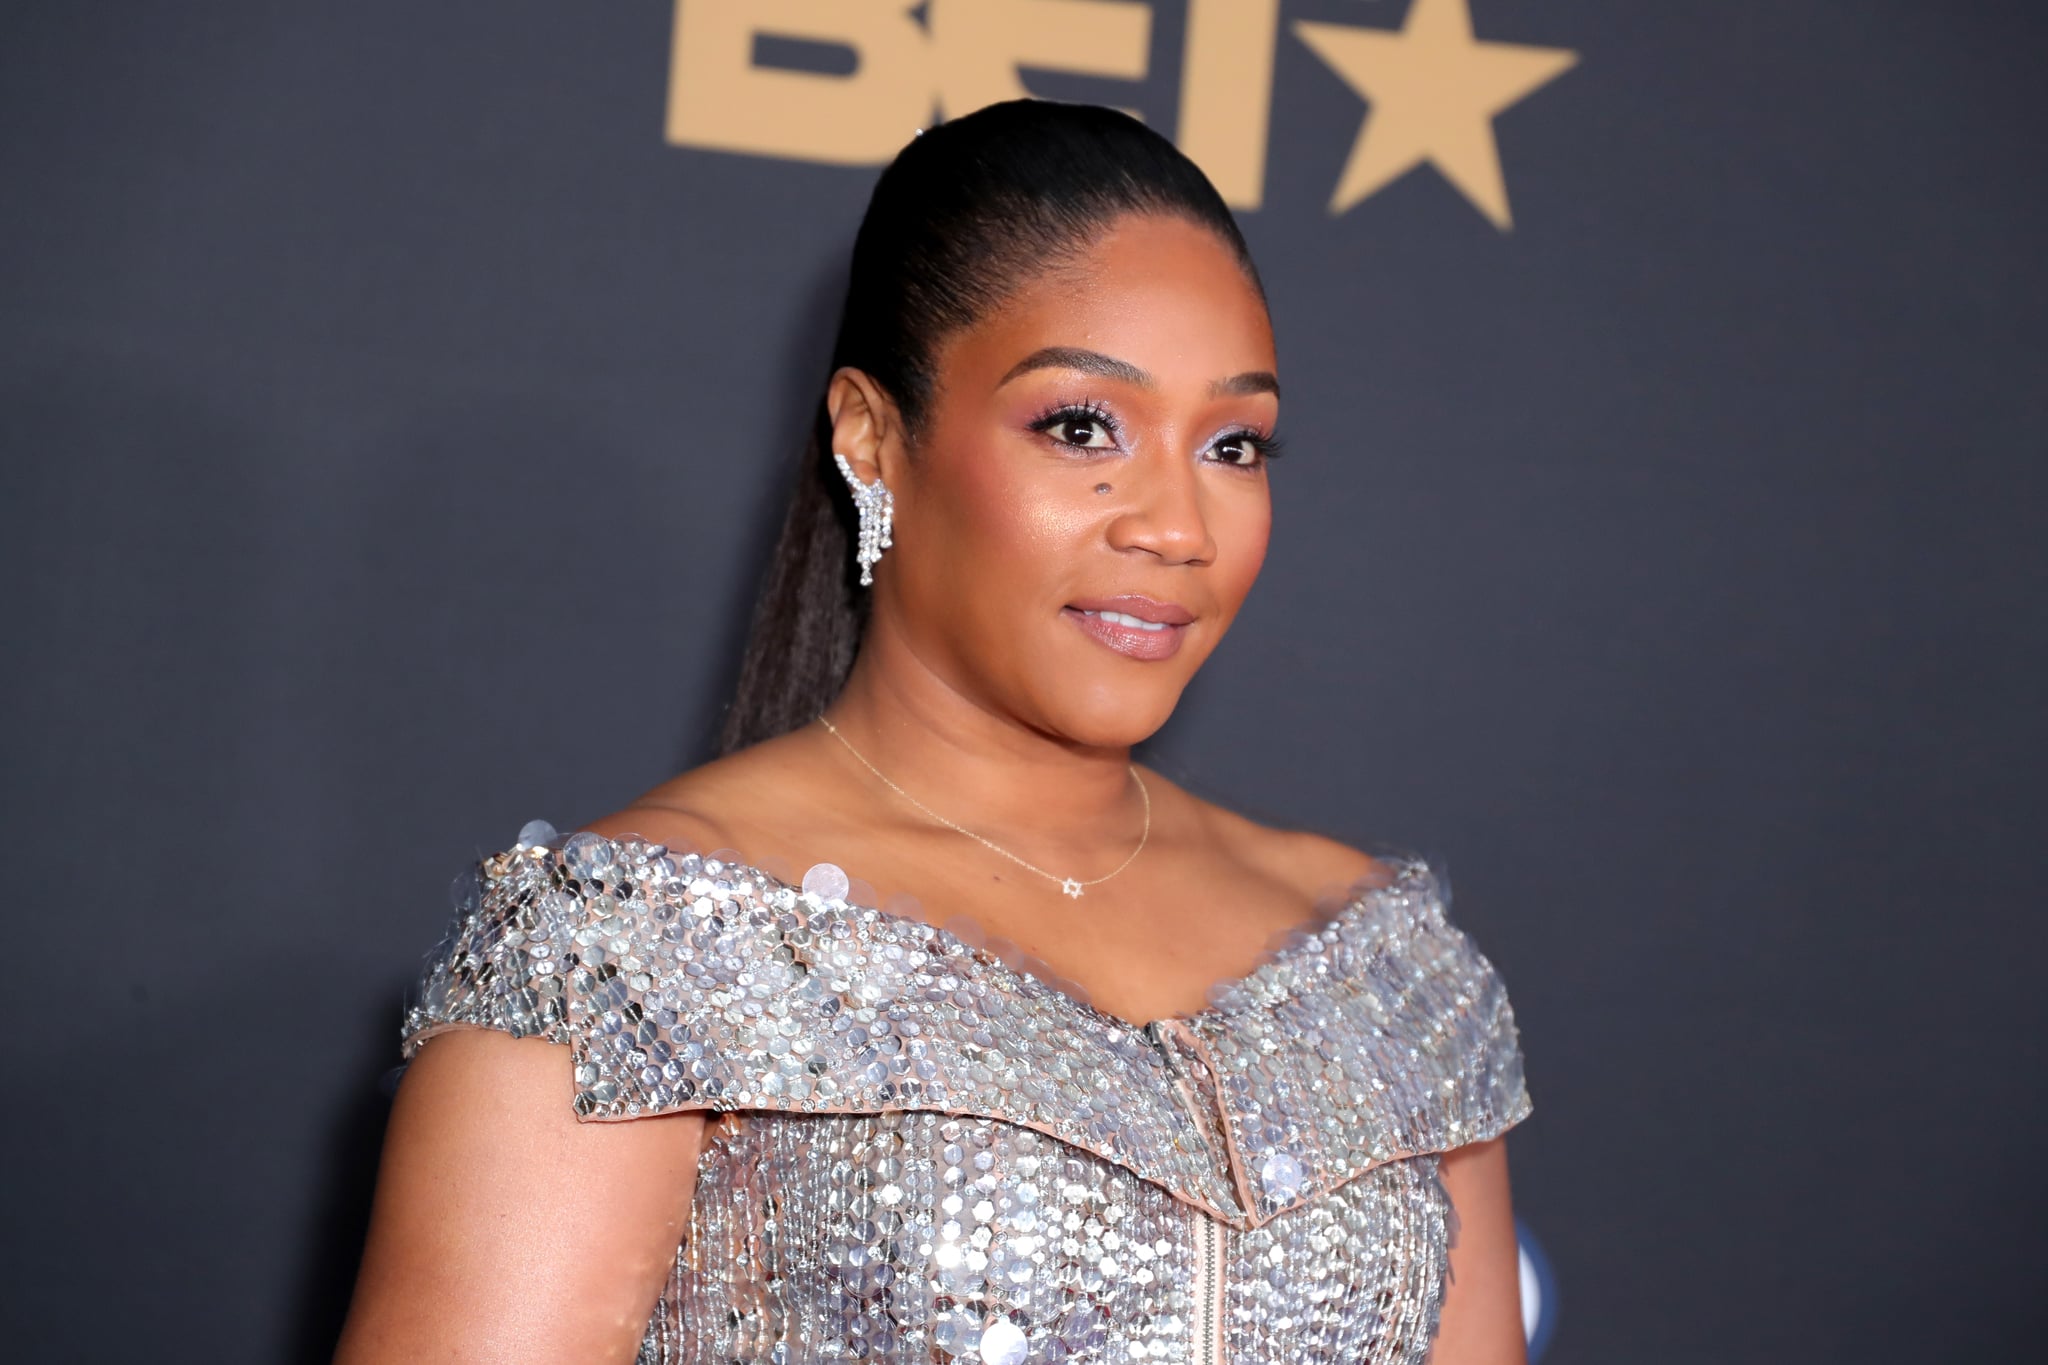 PASADENA, CALIFORNIA - FEBRUARY 22: Tiffany Haddish attends the 51st NAACP Image Awards, Presented by BET, at Pasadena Civic Auditorium on February 22, 2020 in Pasadena, California. (Photo by Leon Bennett/Getty Images for BET)